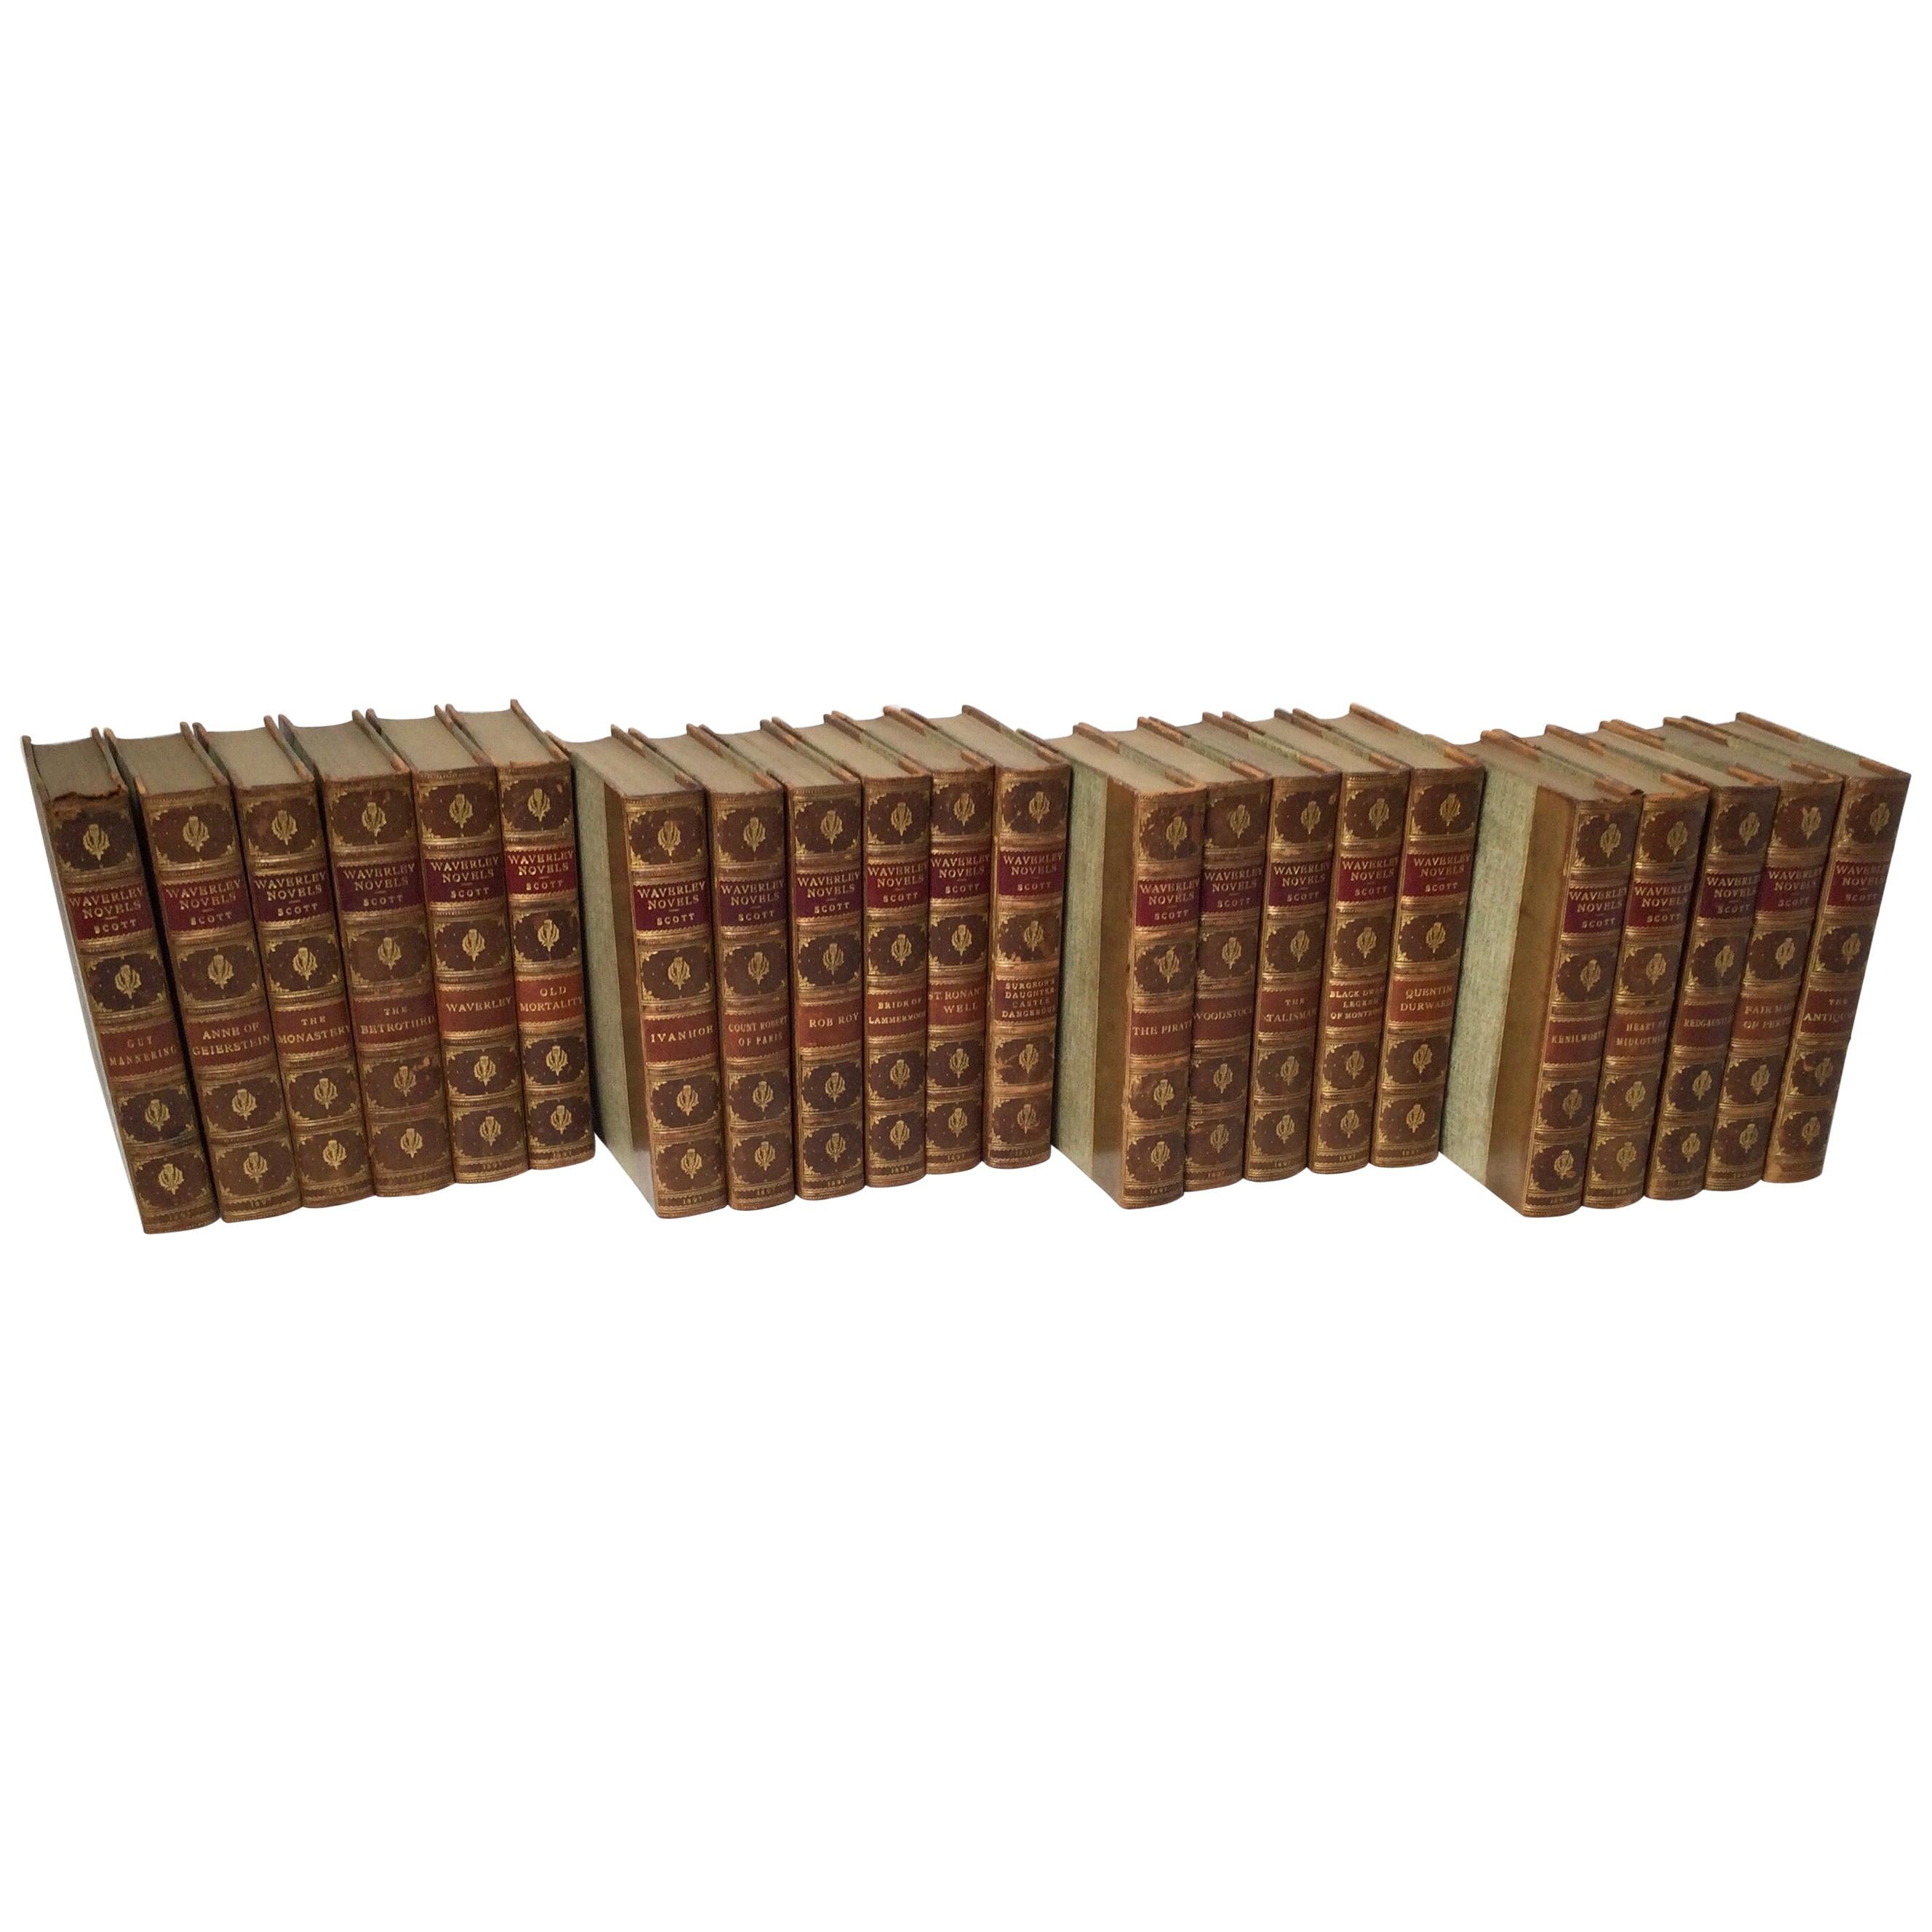 Set of 22 Leather Bound Books, The Waverly Novels by Sir Walter Scott